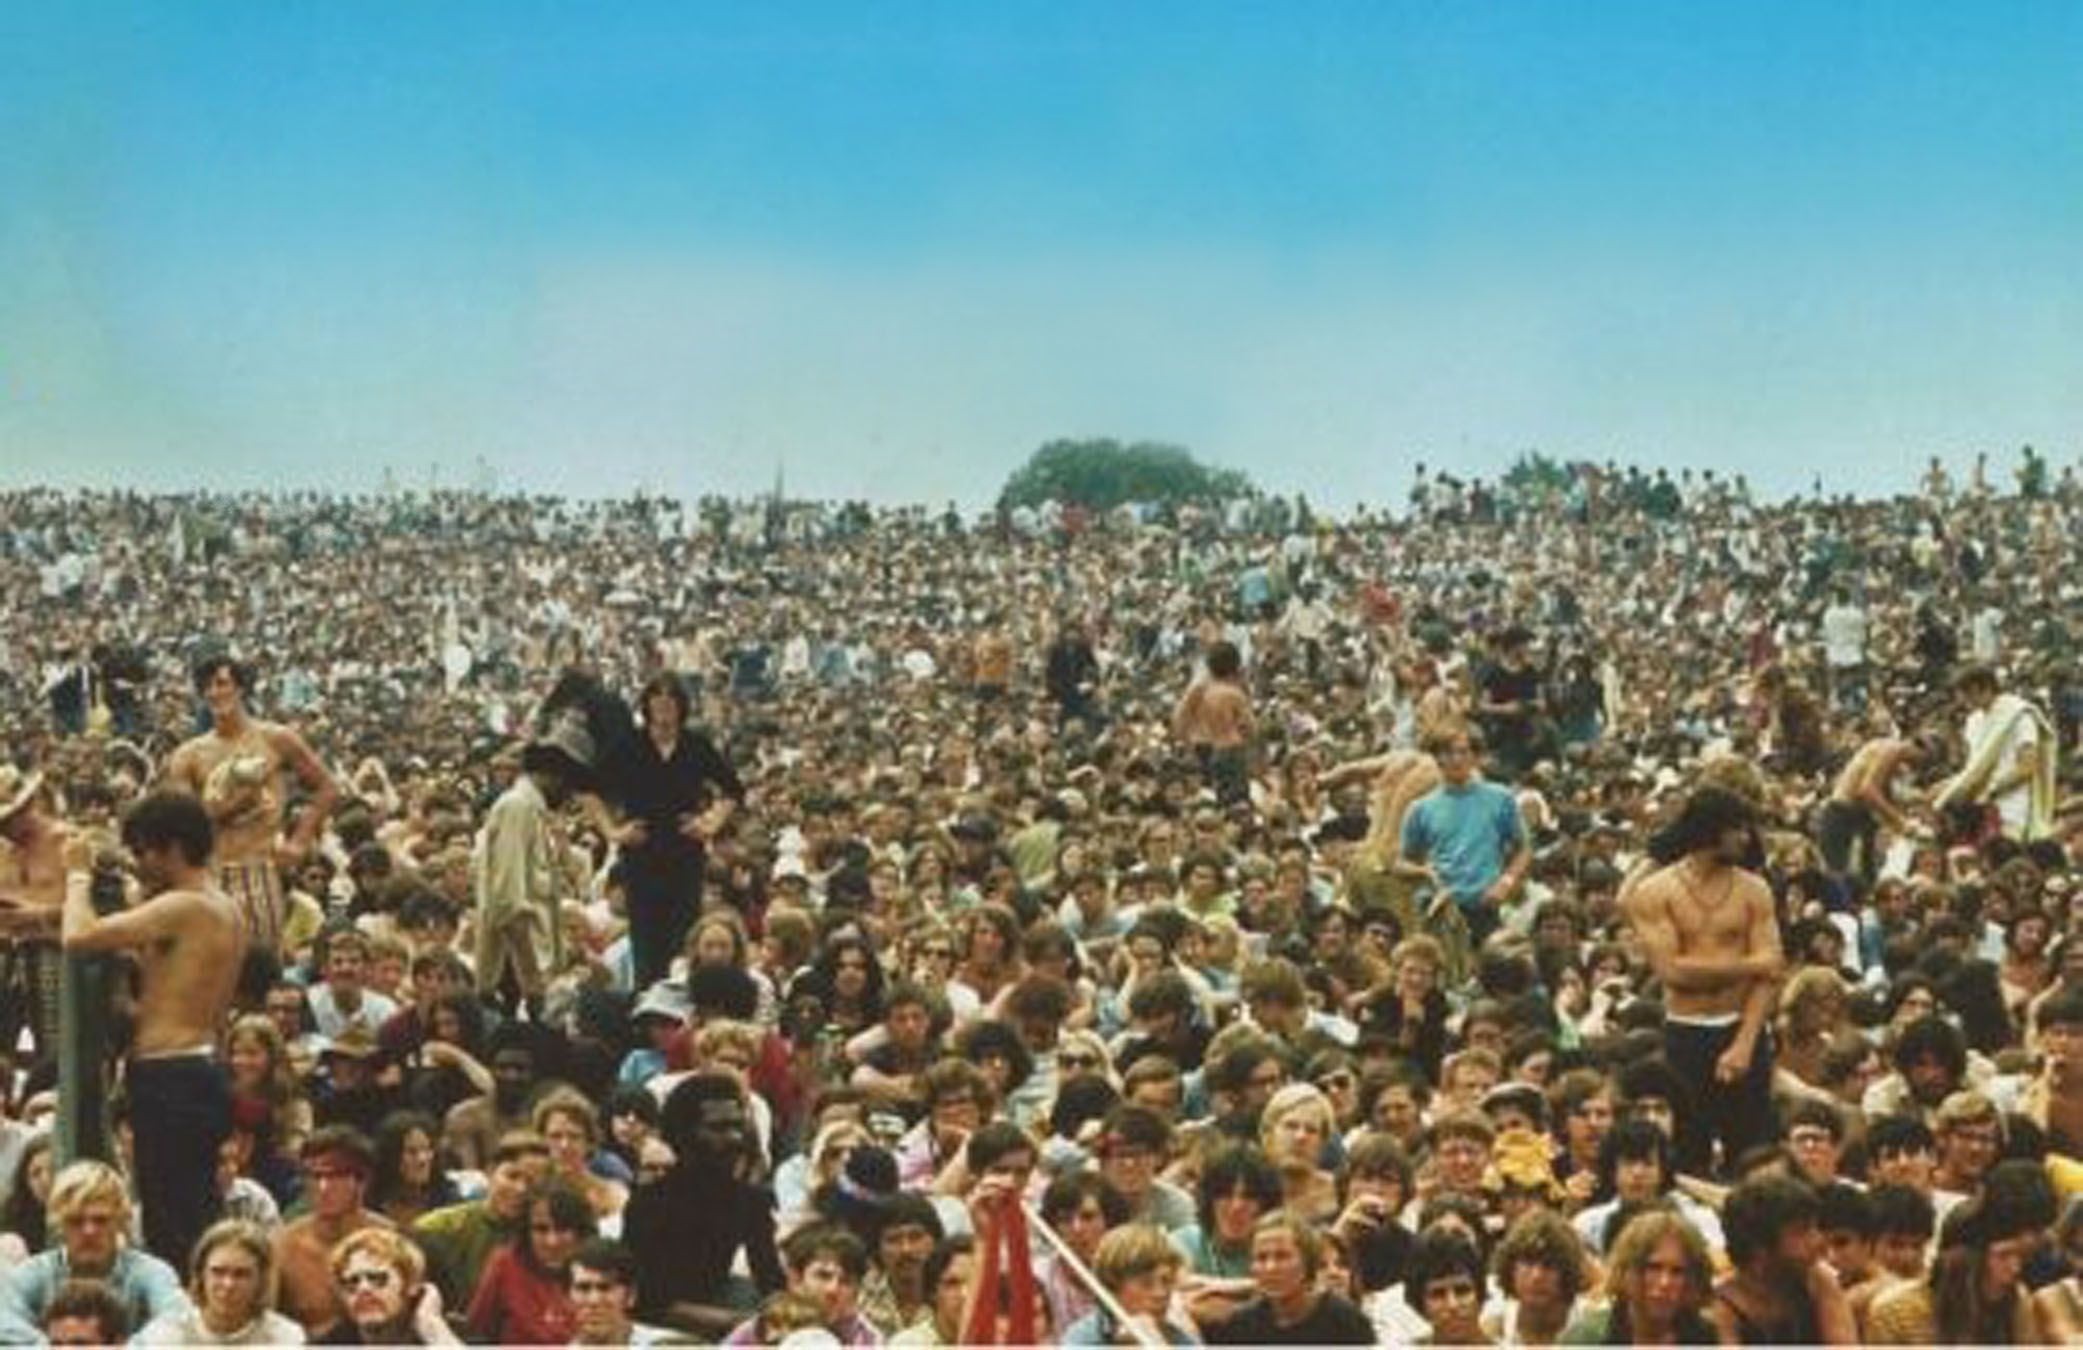 Fun facts about Woodstock 1969 (with picture)